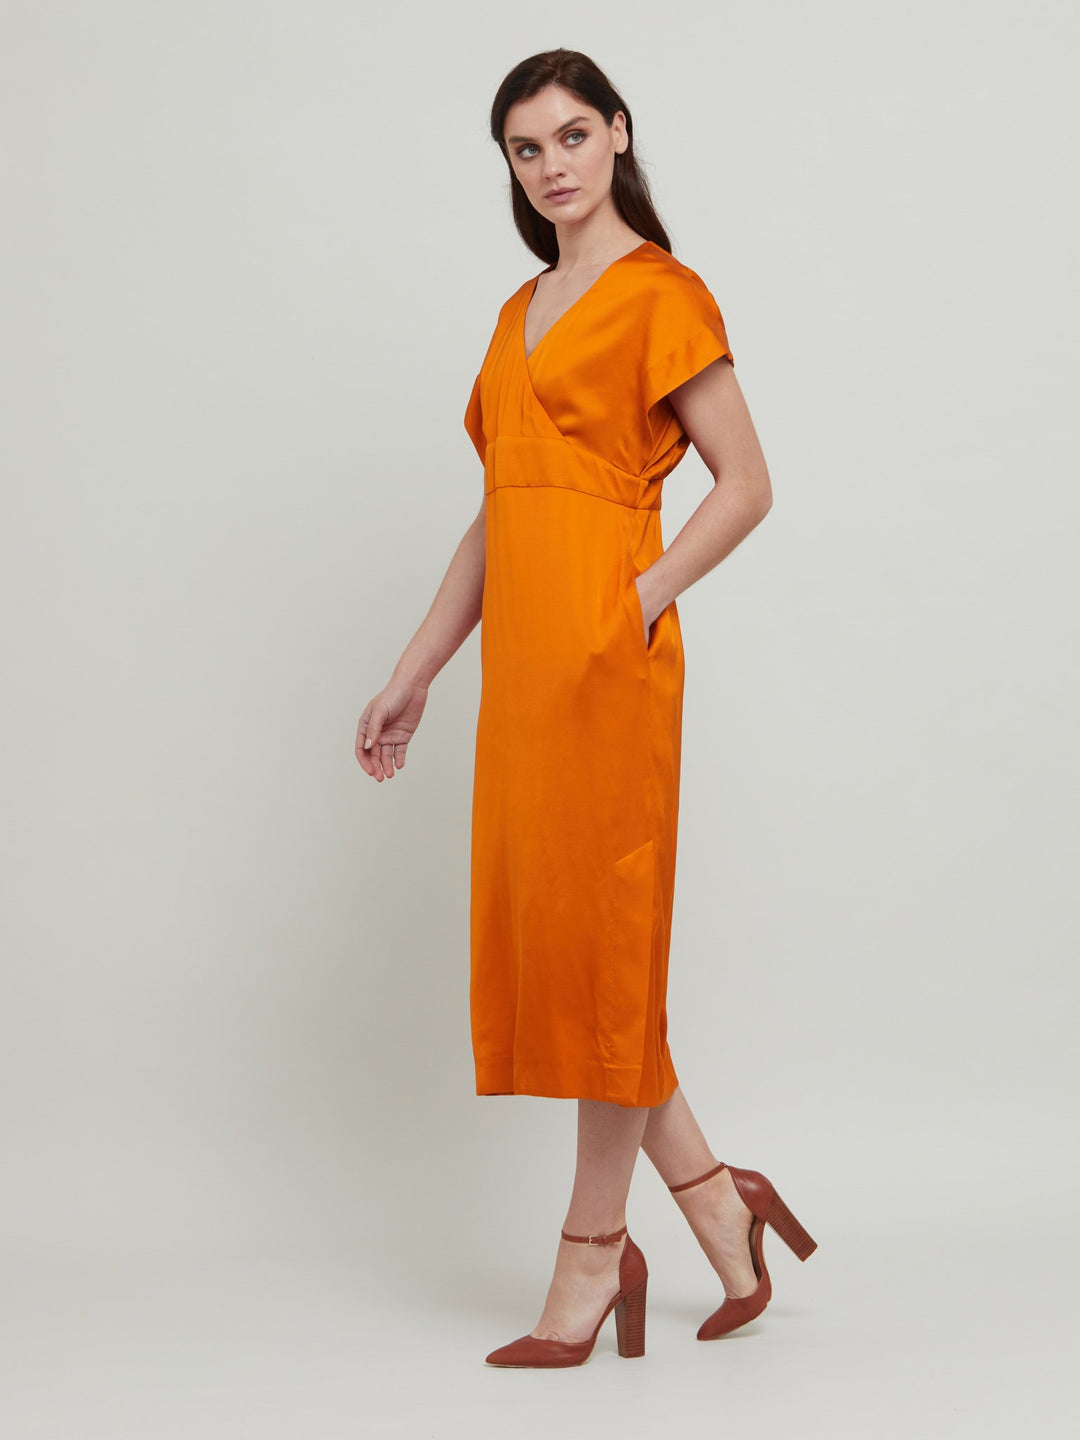 Classic occasion wear, modernized. Meet the Fleur Dress in luxurious burnished rust satin viscose. An easy-fitting silhouette with a v-neckline, falls to the mid-calf and features side slit, pockets, and an elegant key-hole back neck detail.  Attending a summer wedding? Mother of the bride? Heading to the races? This is the dress for you. Designed in Ireland by Helen McAlinden. Made in Europe. Free shipping to the EU & UK.